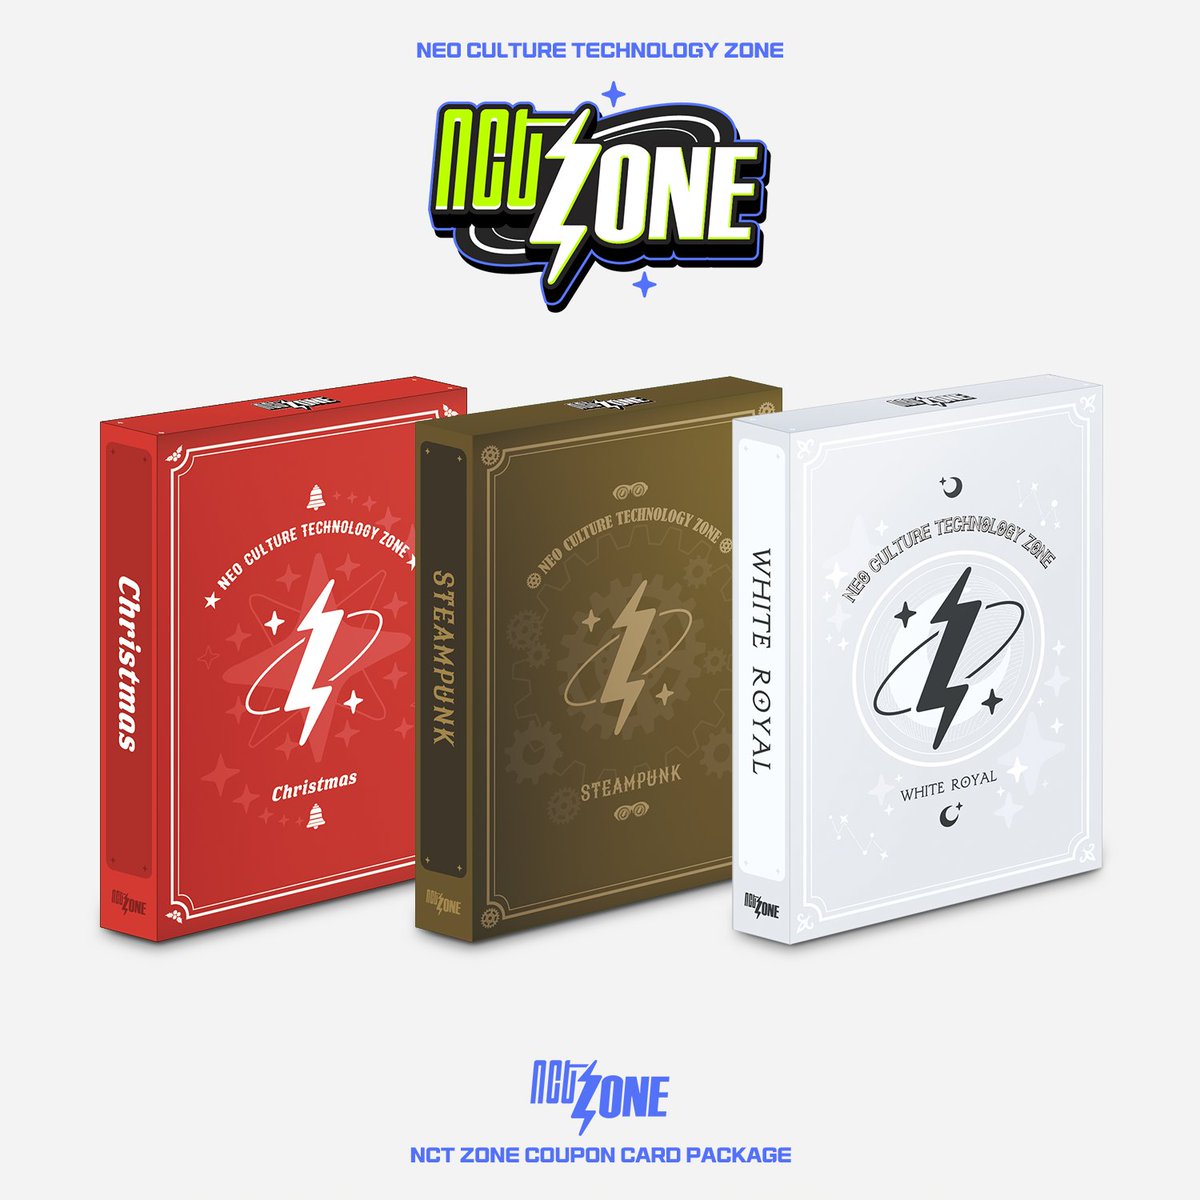 [🔔] NCT ZONE OFFICIAL COUPON CARD PACKAGE🕹 NCTZ Coupon Card Package 3 Types, 𝑁𝐶𝑇🤍 NCT ZONE 게임 쿠폰과 독점 이미지 카드, 5% 확률로 한정 증정되는 3종 컨셉의 SP 카드까지💚 📍RELEASE ➫ 2024. 04. 18 *KST 🔗ORDER SITE SMTOWN &STORE : bit.ly/4aCPgzz 예스24 :